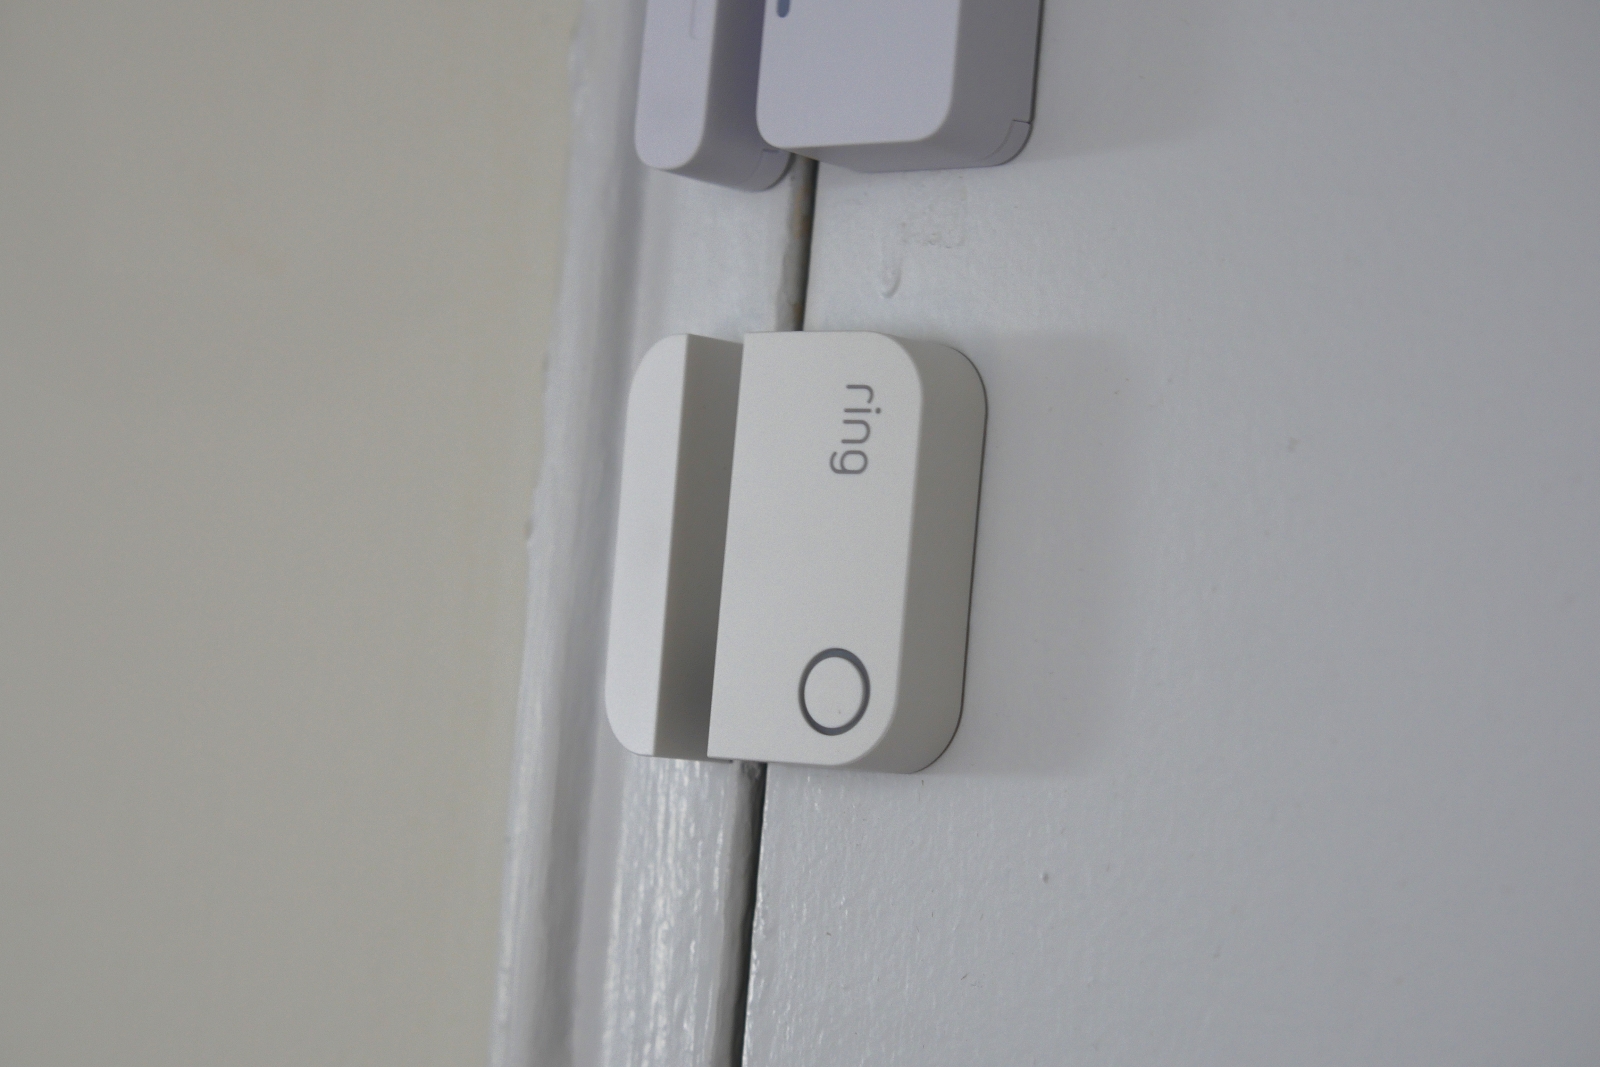 Ring Alarm (2nd Gen) review: Still the best DIY home security system |  TechHive